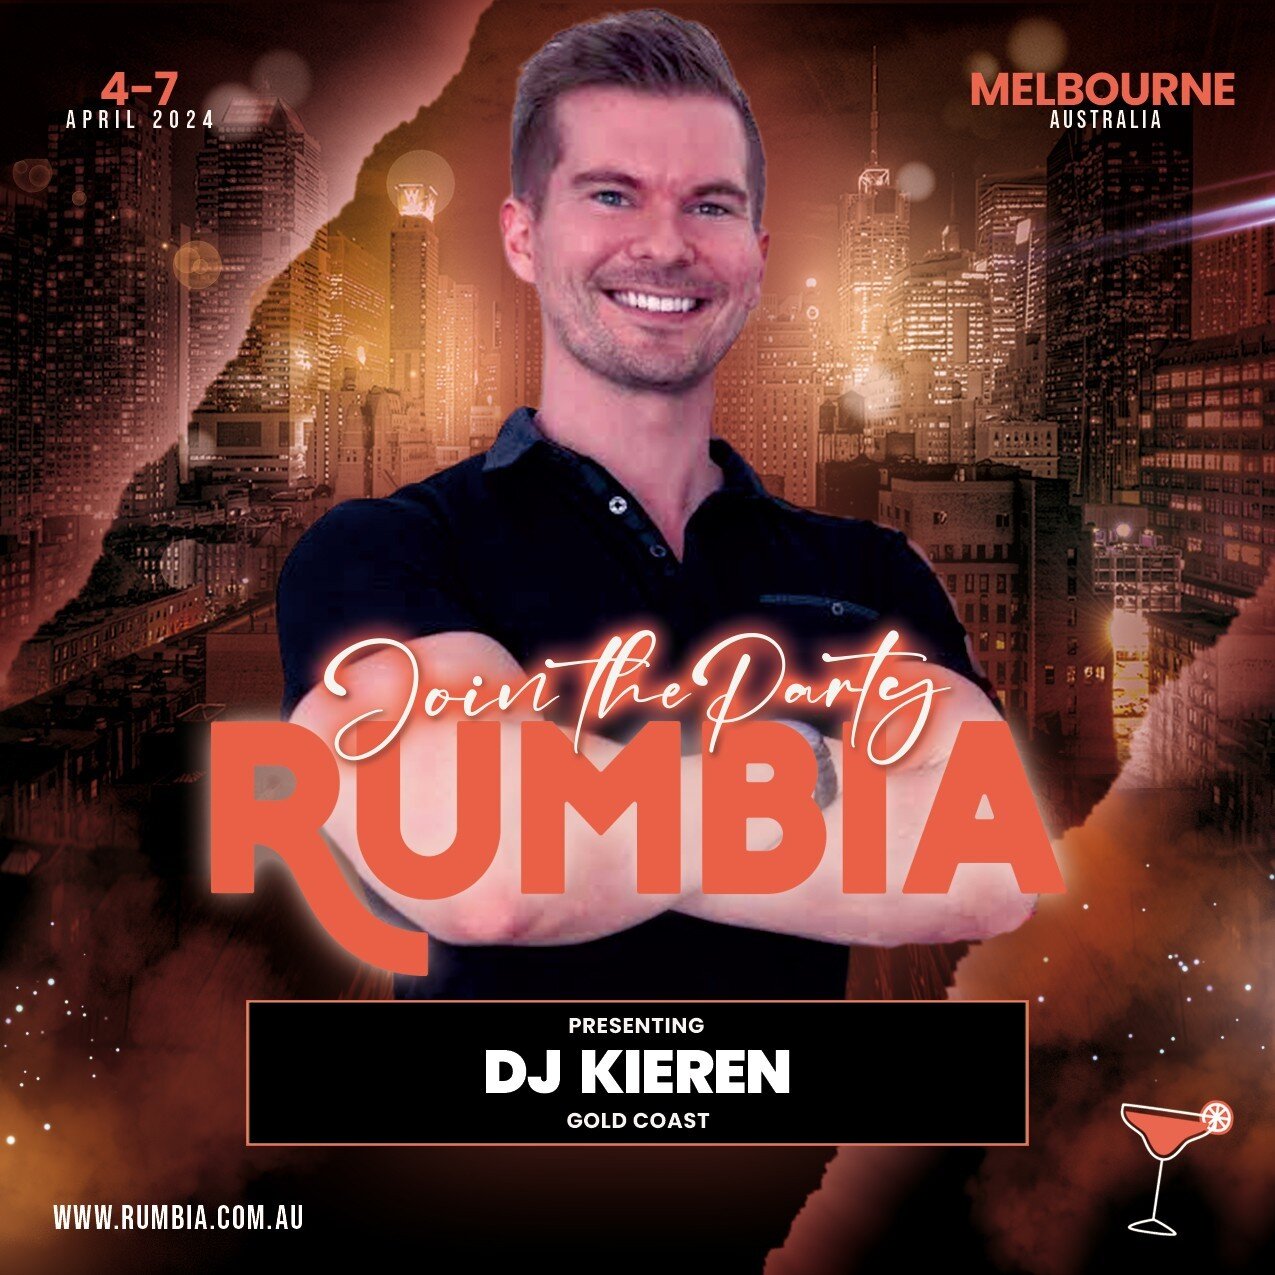 DJ ANNOUCEMENT 2024 🎶 ⁠
DJ KIEREN - GOLD COAST (BACHATA ROOM)⁠
⁠
@kieranjfulton⁠
⁠
Renowned as one of the hottest Bachata DJs from Queensland, DJ Kieran sets the stage on fire with a blend of old school classics and fresh tracks that ignite the danc